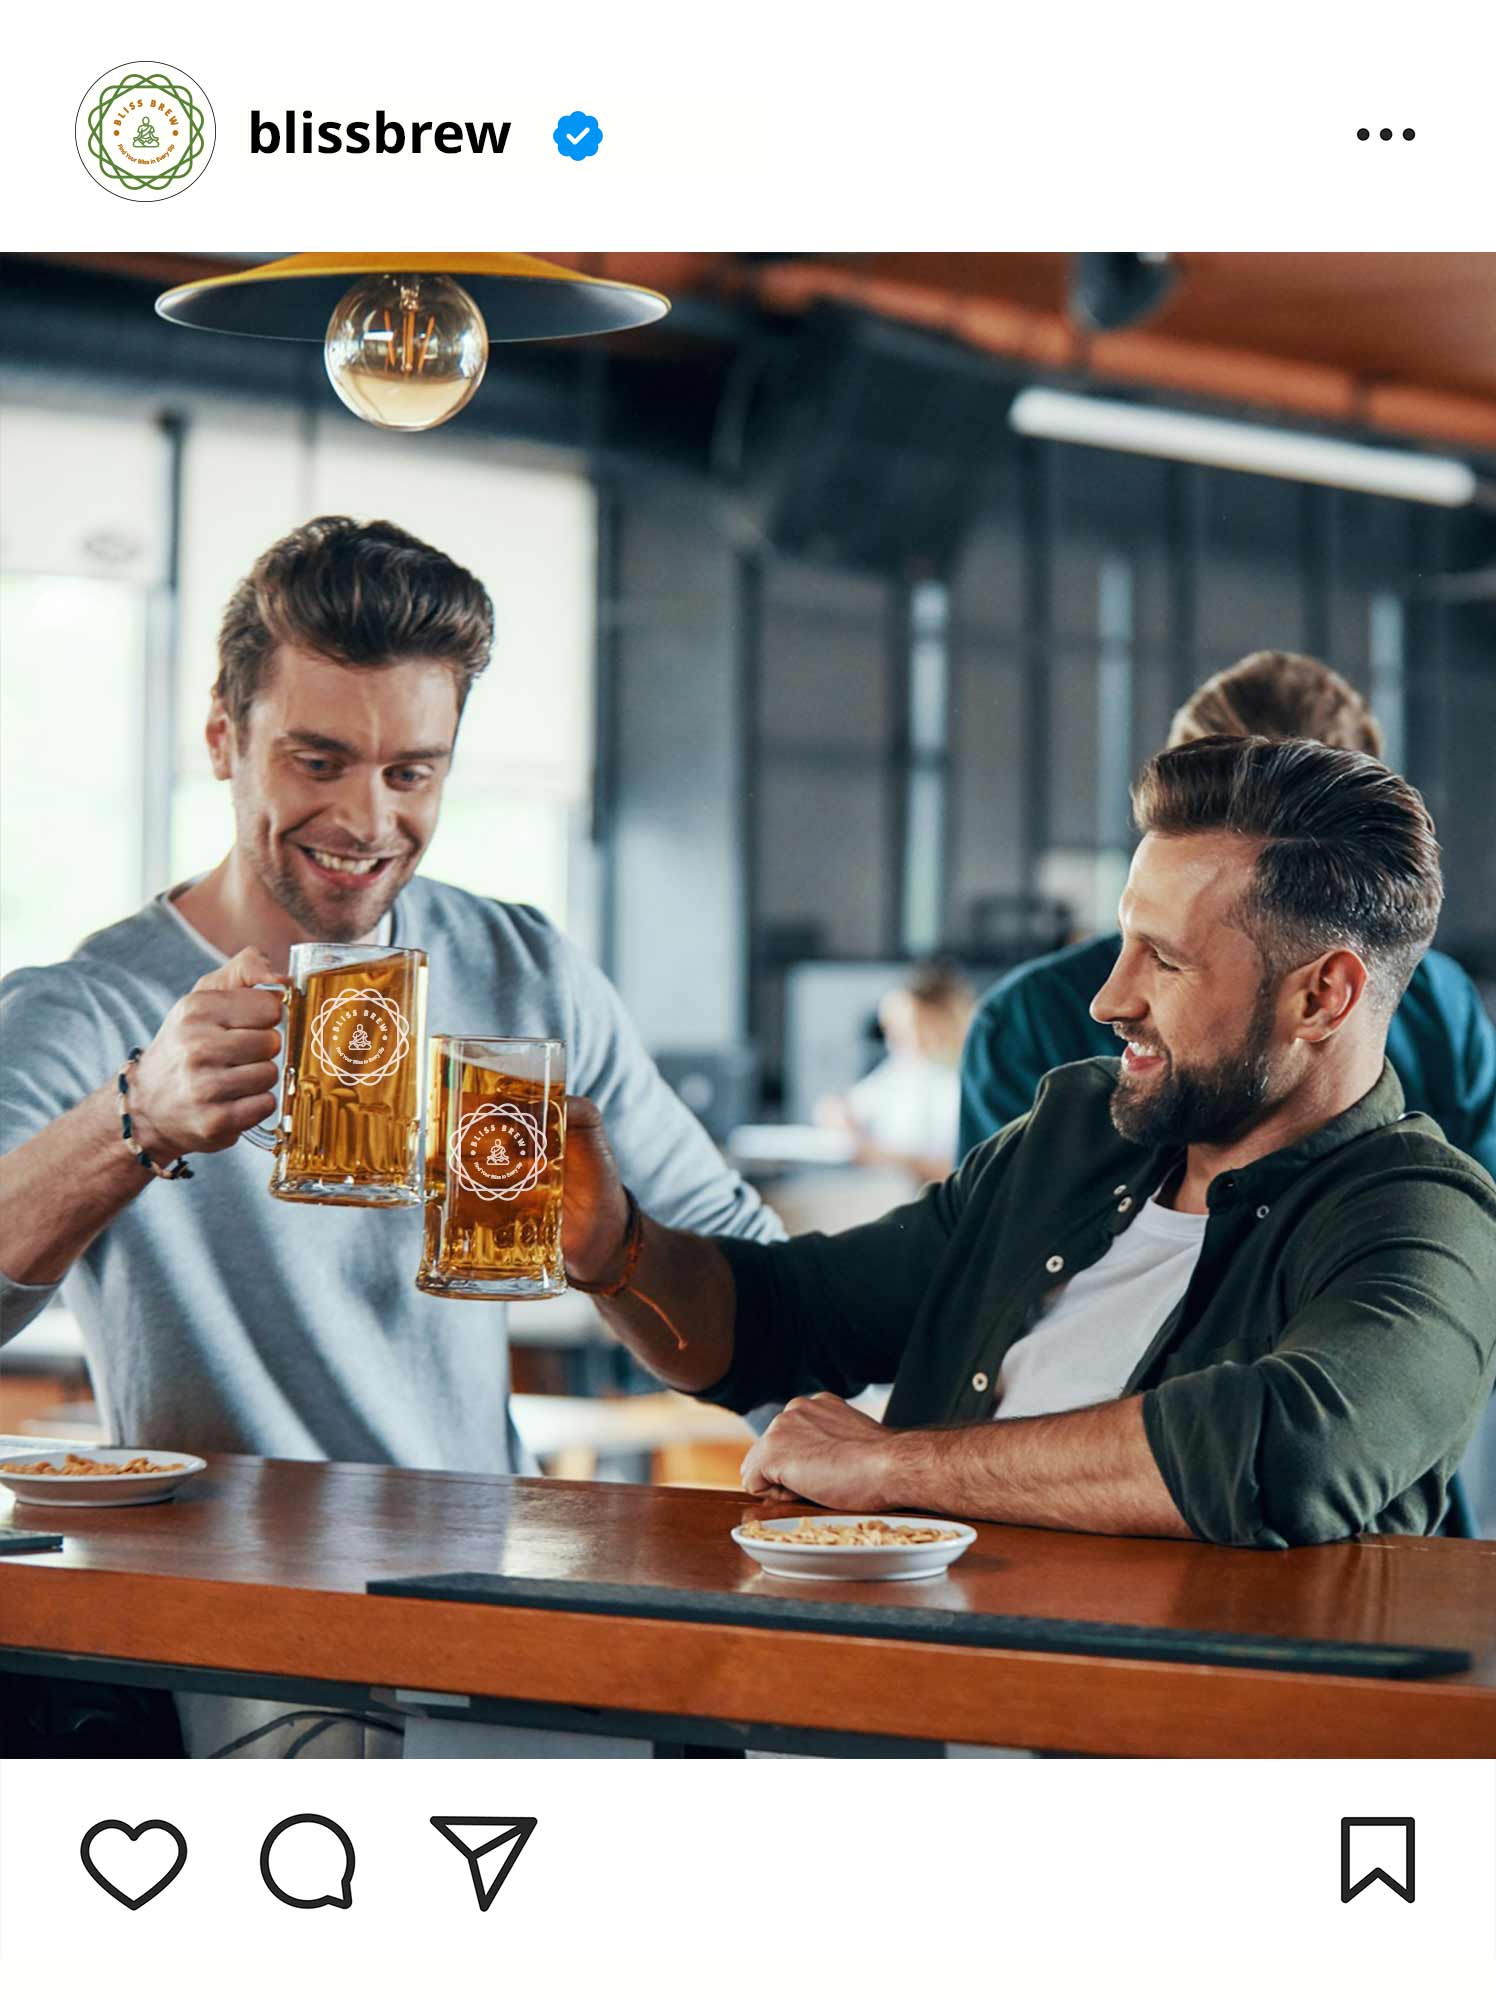 A instagram picture of two people drinking beer together.